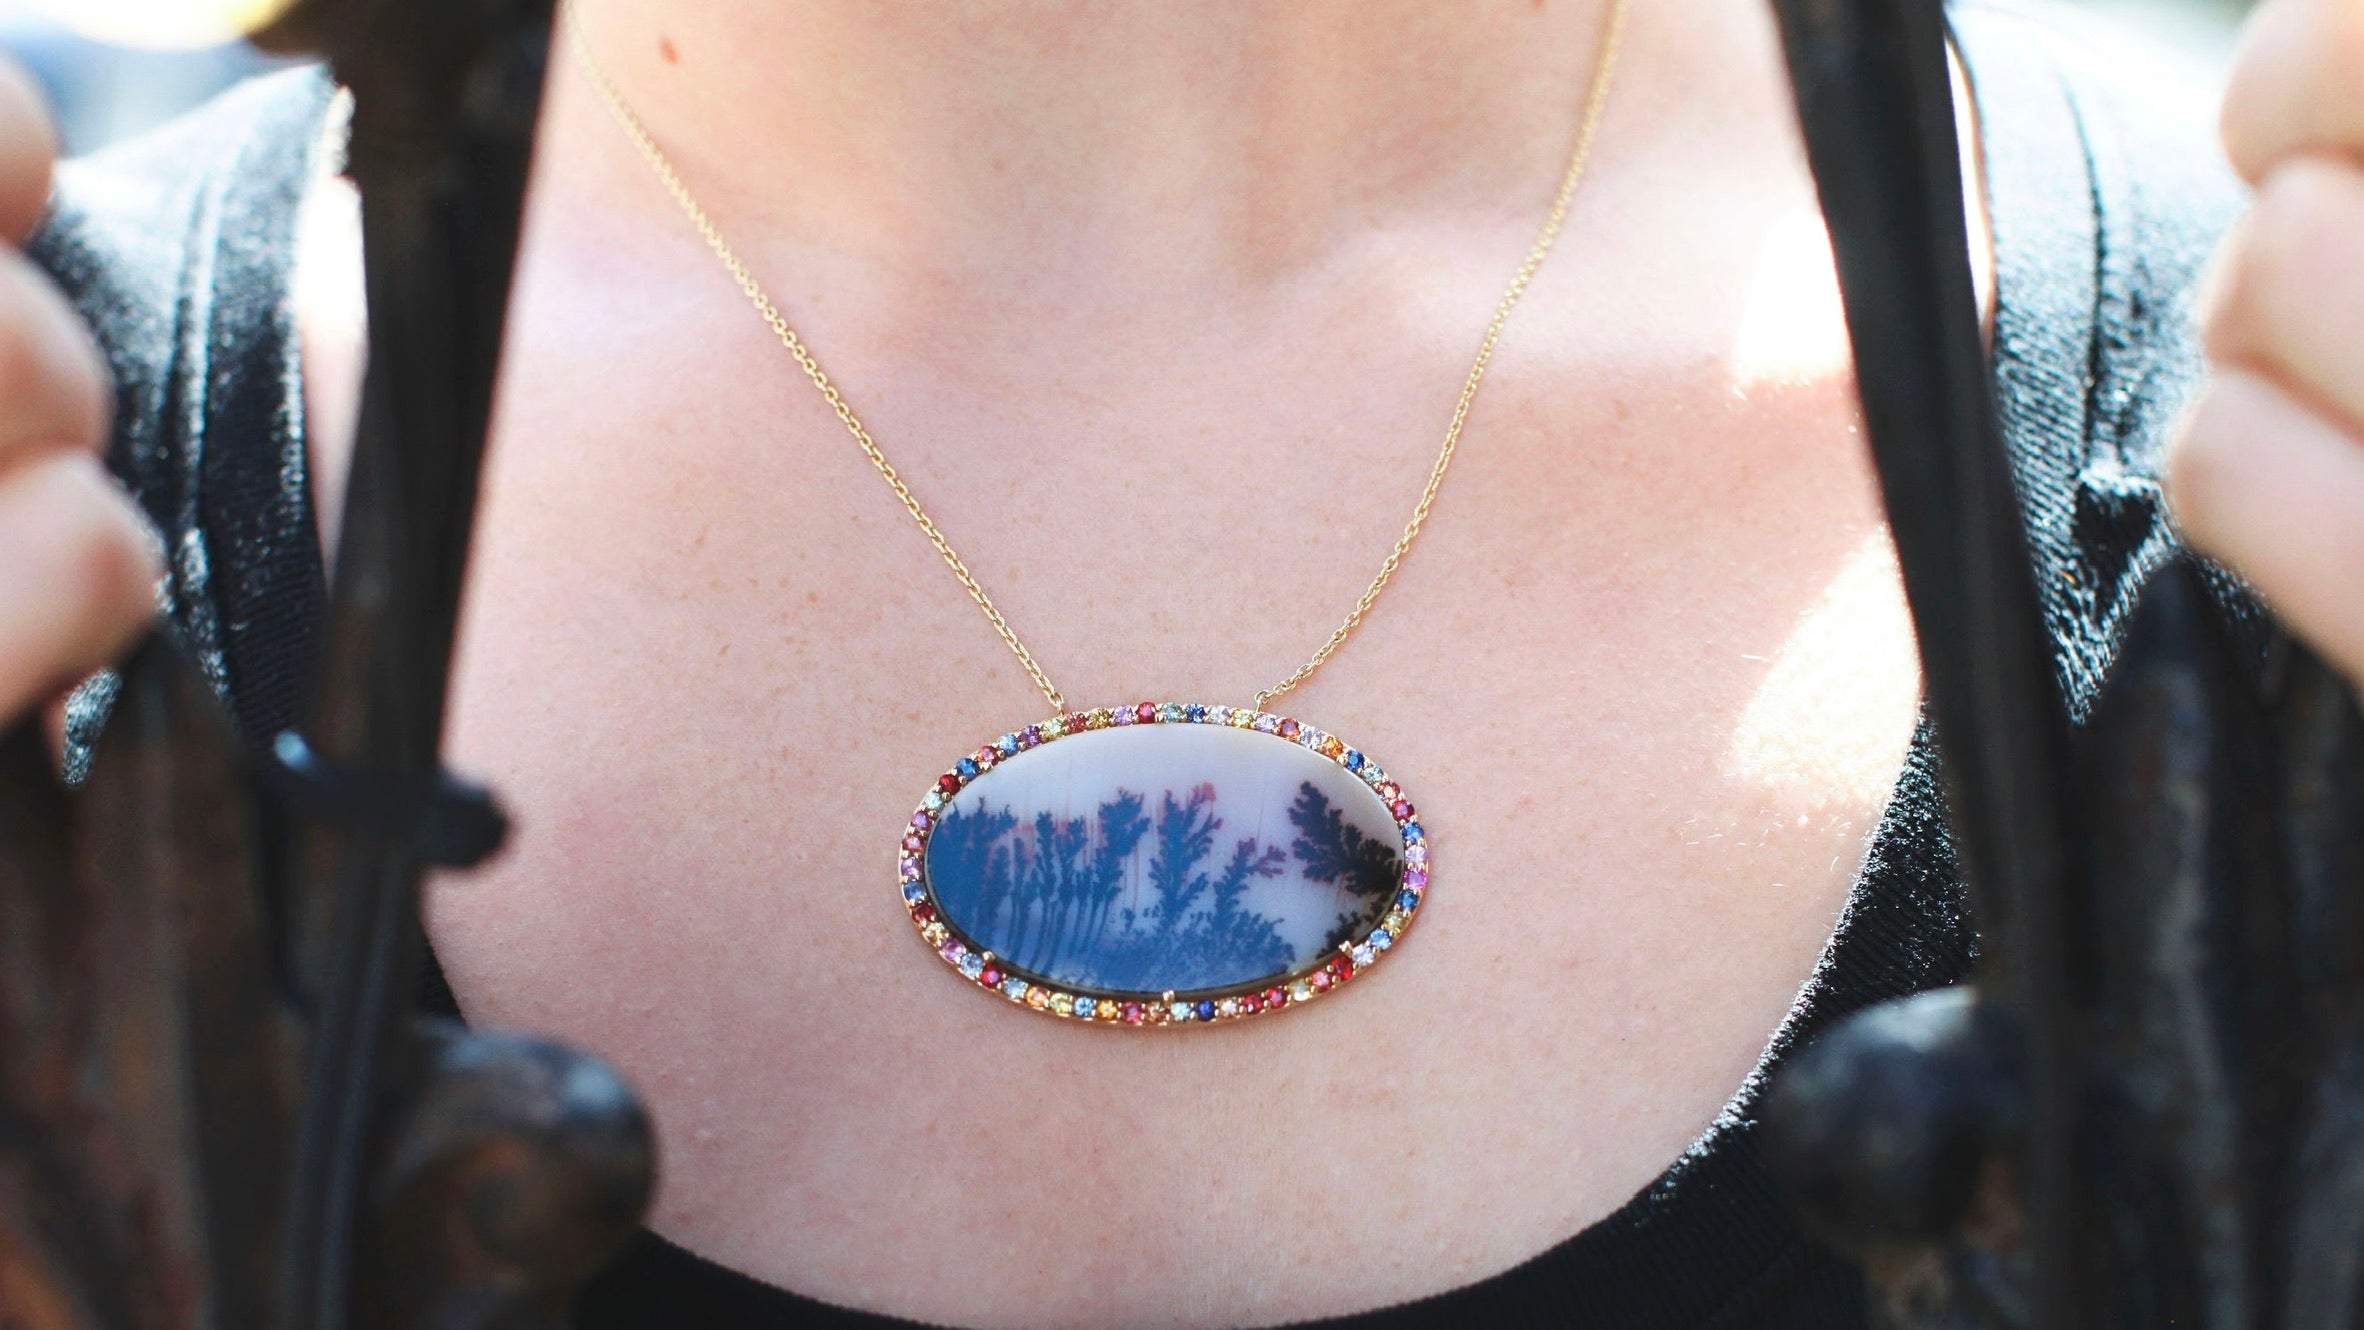 14K Yellow Gold Custom Design One-Of-A-Kind Picture Agate w/Multi-Colored Sapphire Accent 18" Necklace